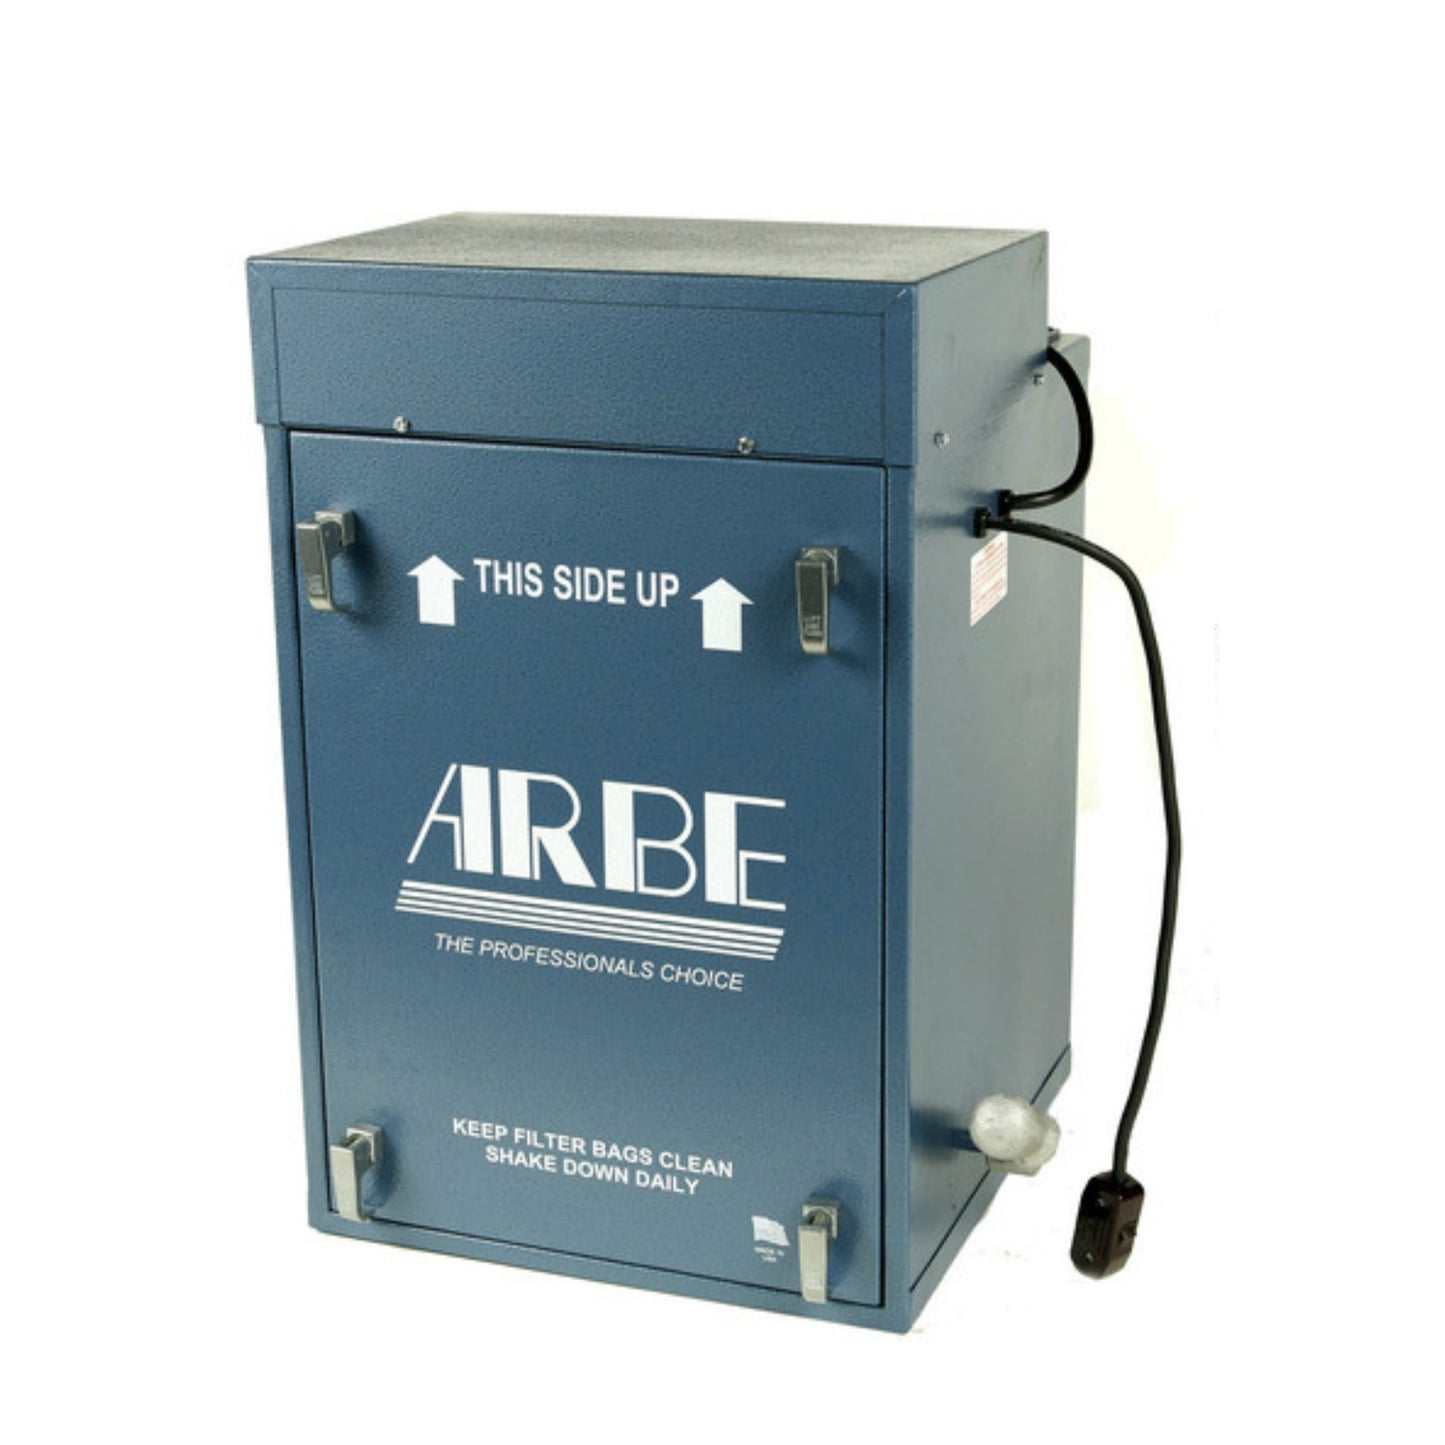 Arbe® Dust Collector - 1/2 HP